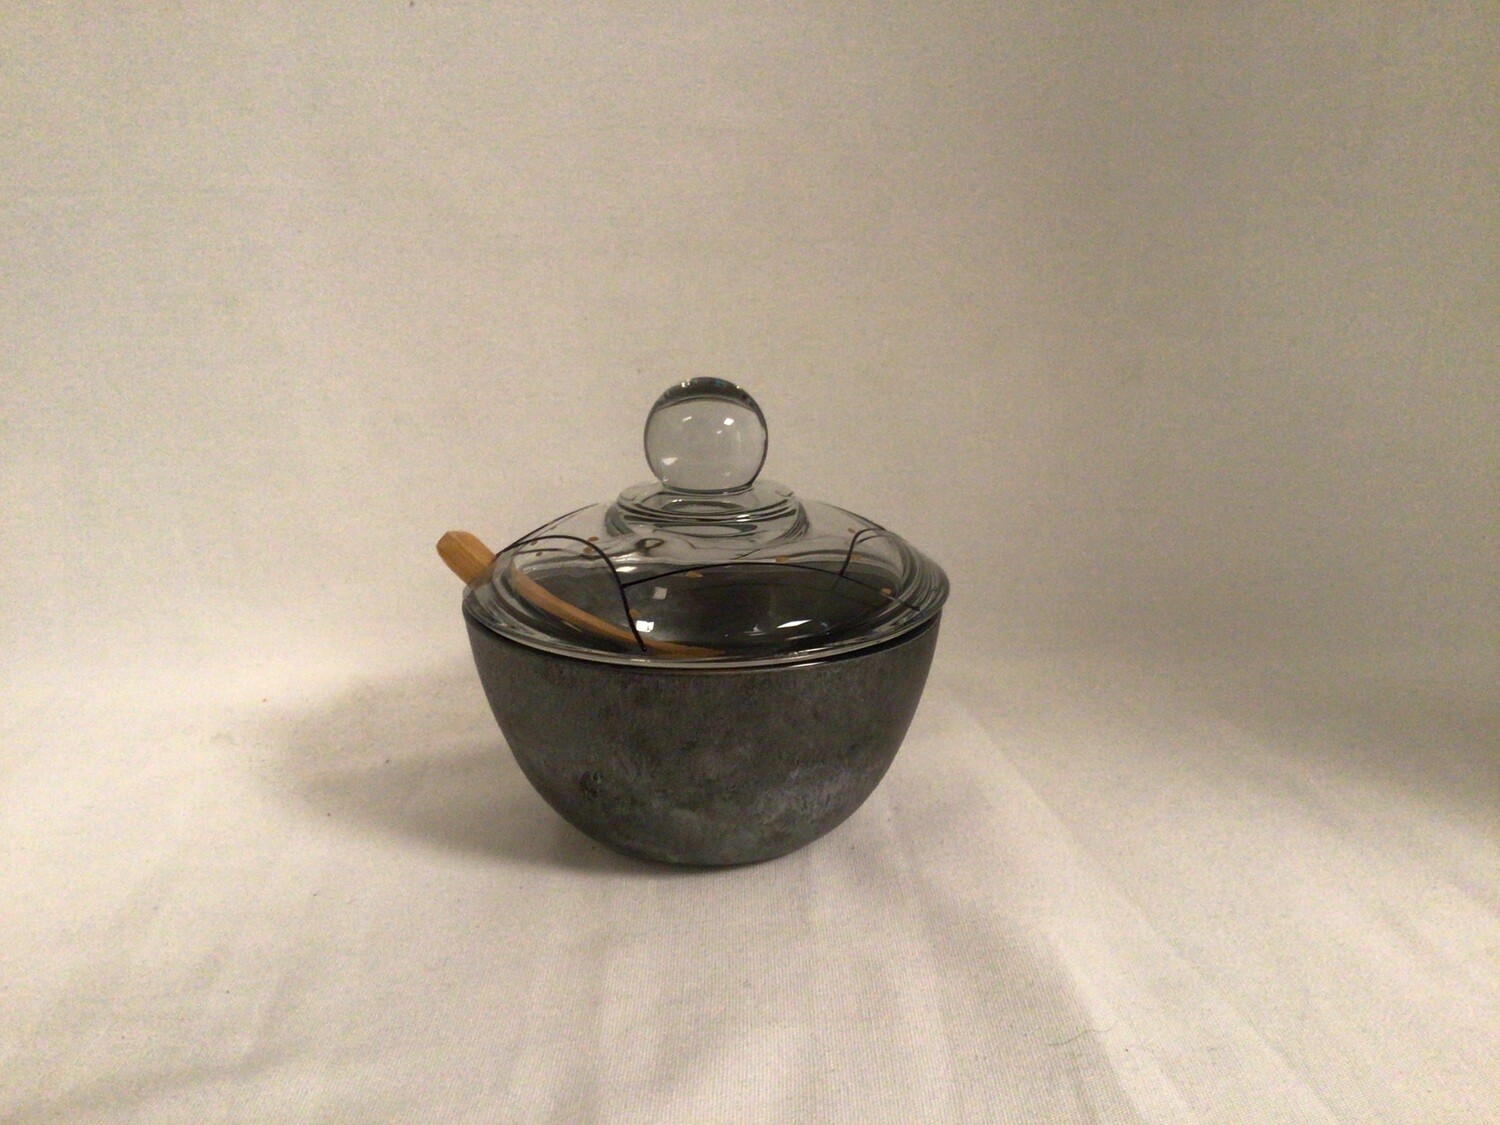 Lidded Painted Glass Bowl with Spoon - Modern